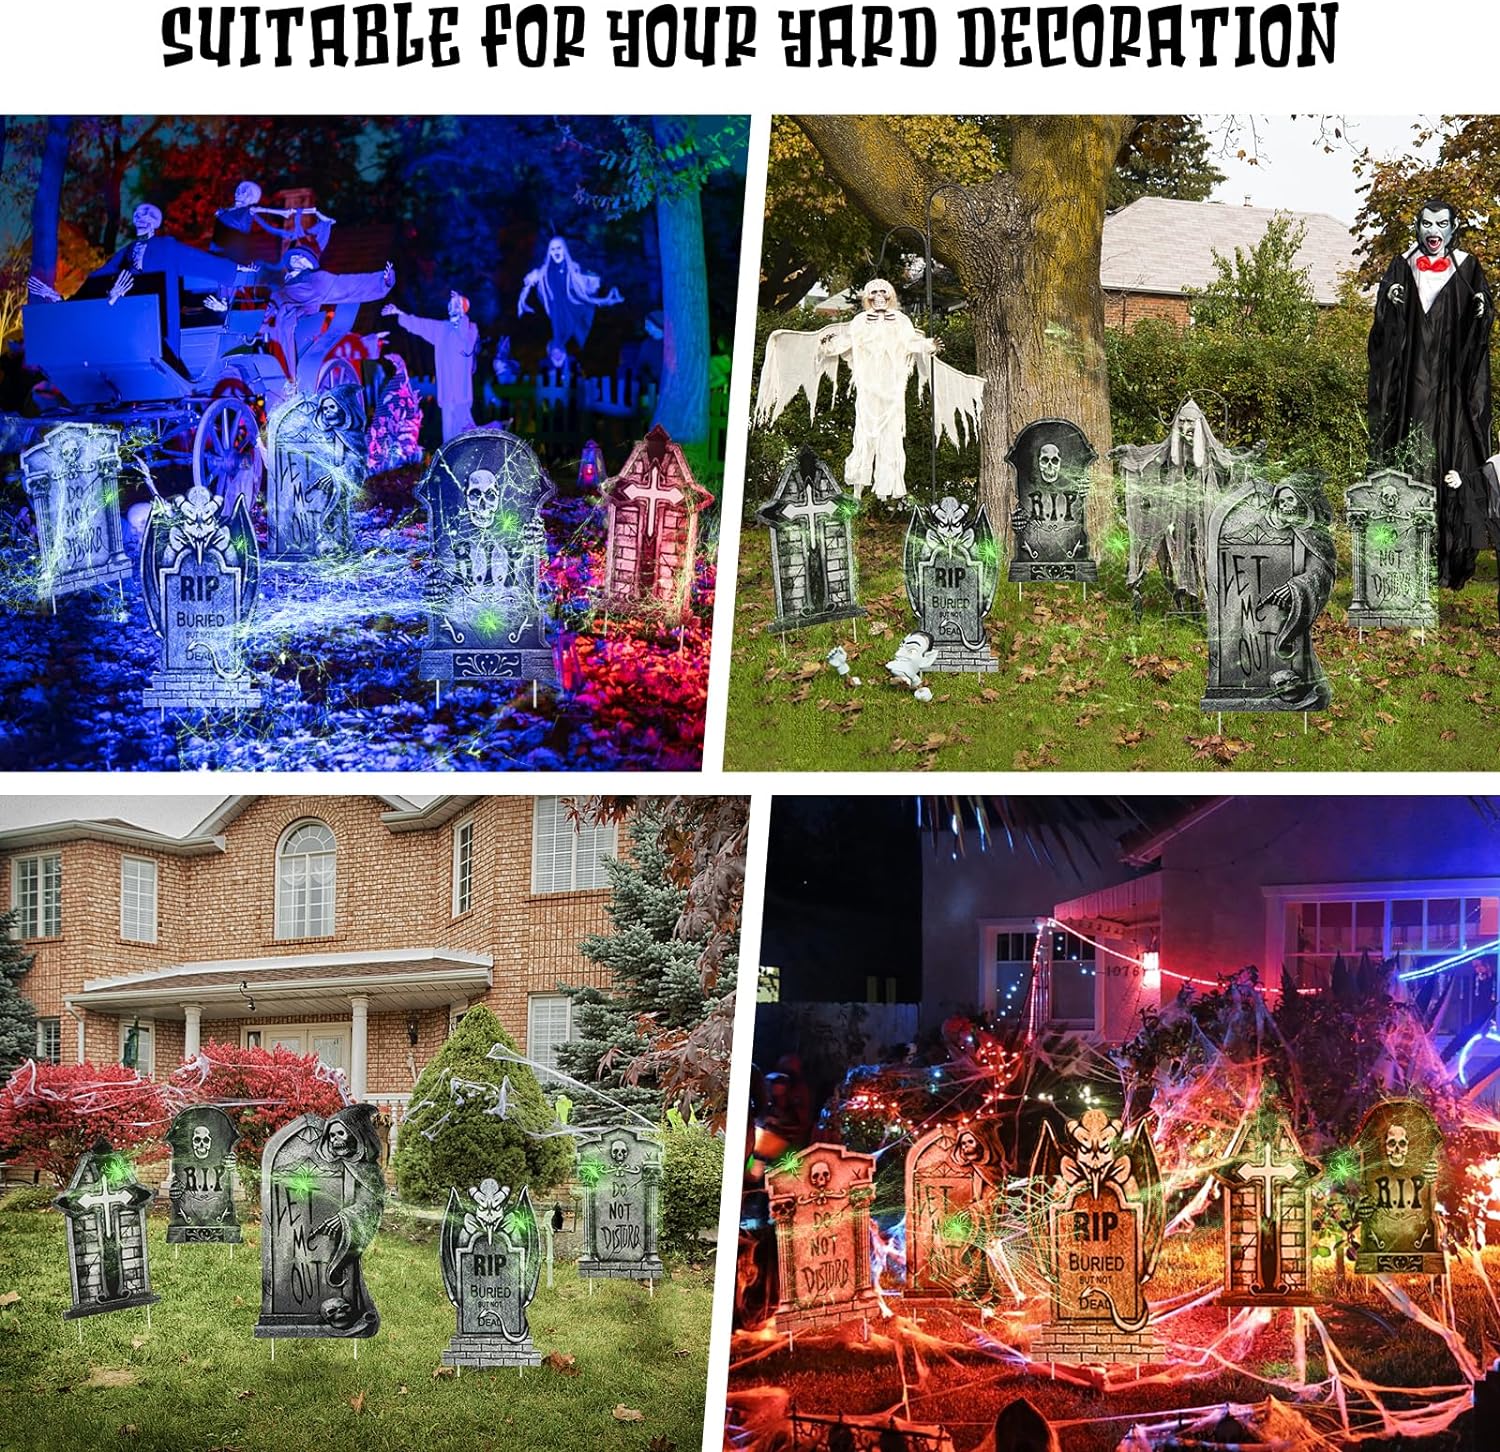 Halloween Tombstone Yard Signs Decorations,RIP Graveyard Headstone Decor for Halloween Party, 5 pack Gravestone Props with Stakes for Outdoor and Indoor Yard Lawn Decorations